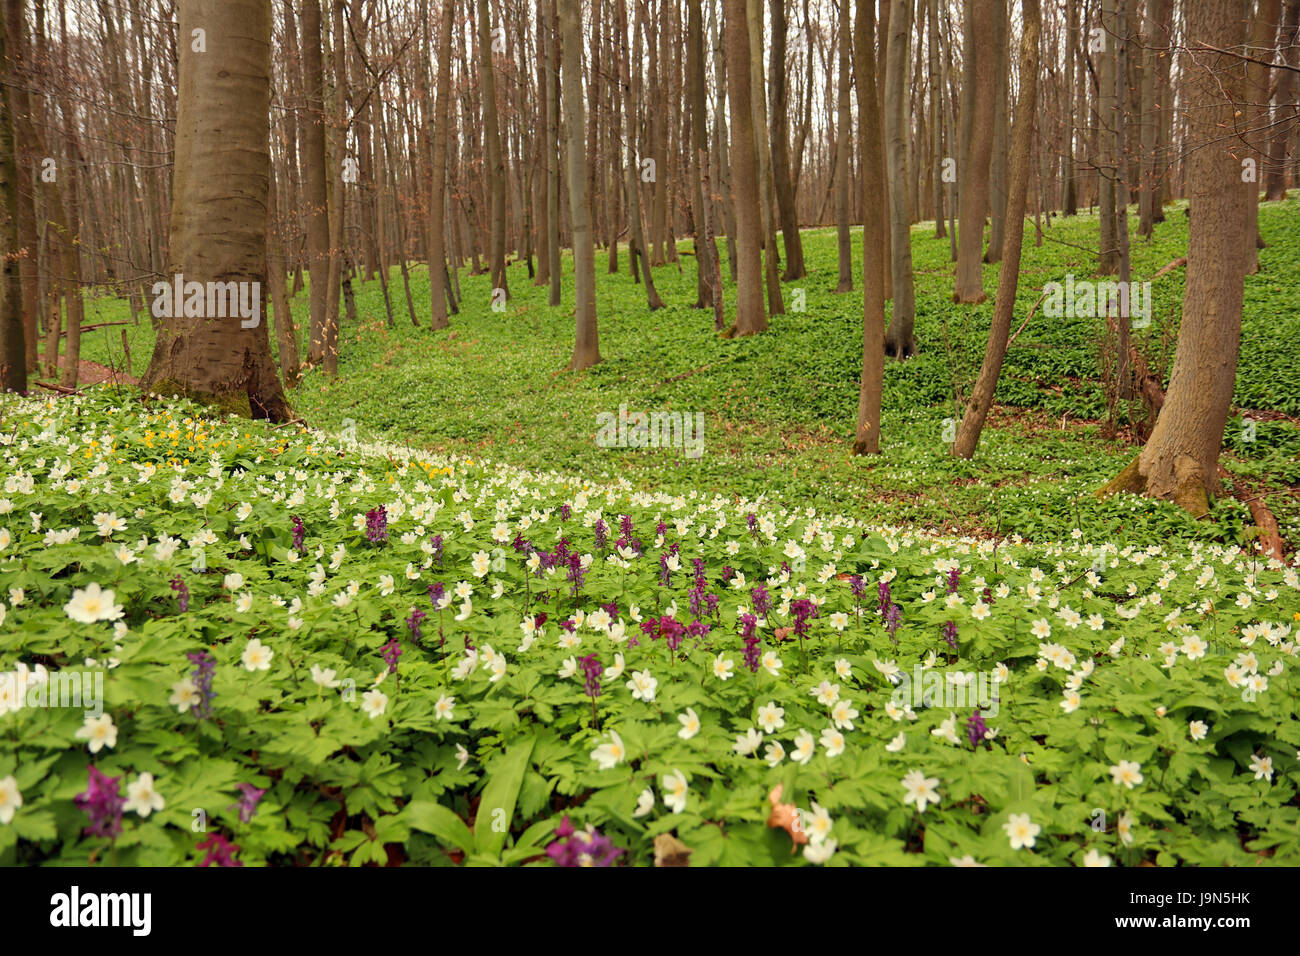 Spring, Hainich National Park, Germany Stock Photo